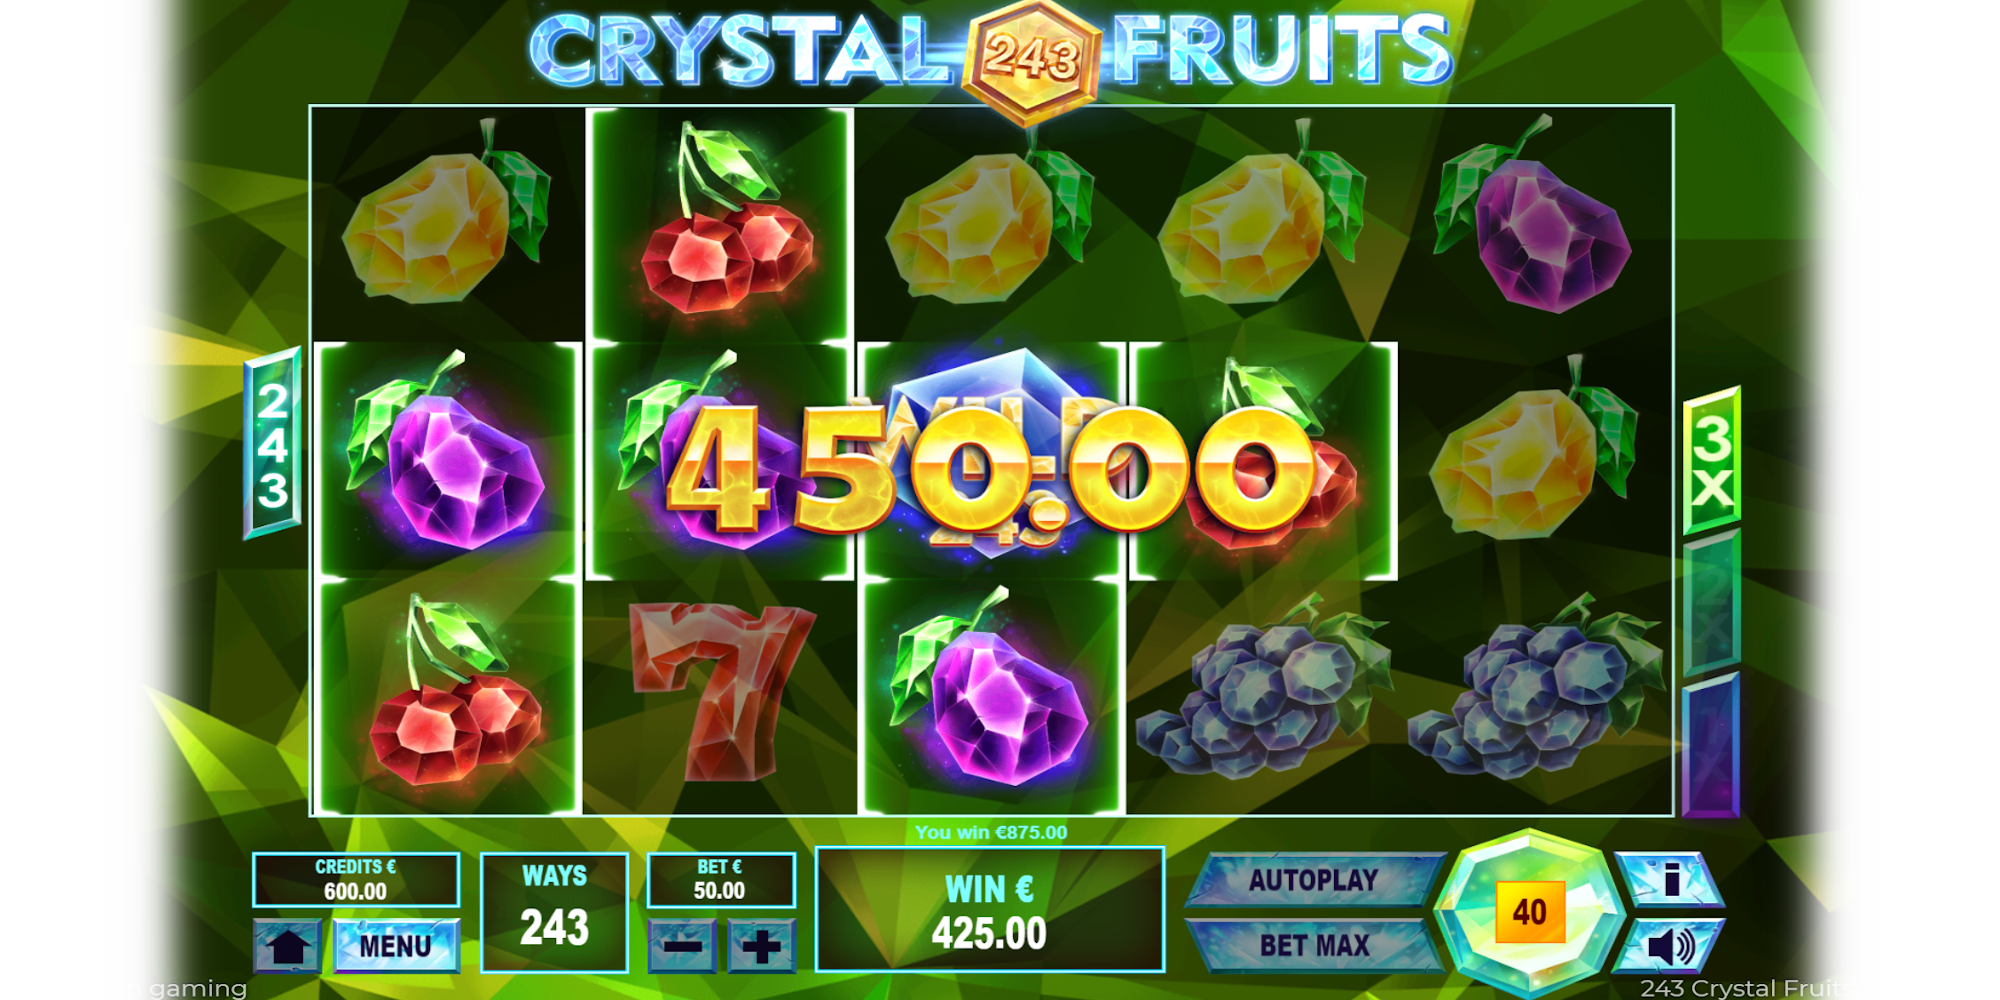 Online slot machine 243 Crystal Fruits Reversed has multipliers feature